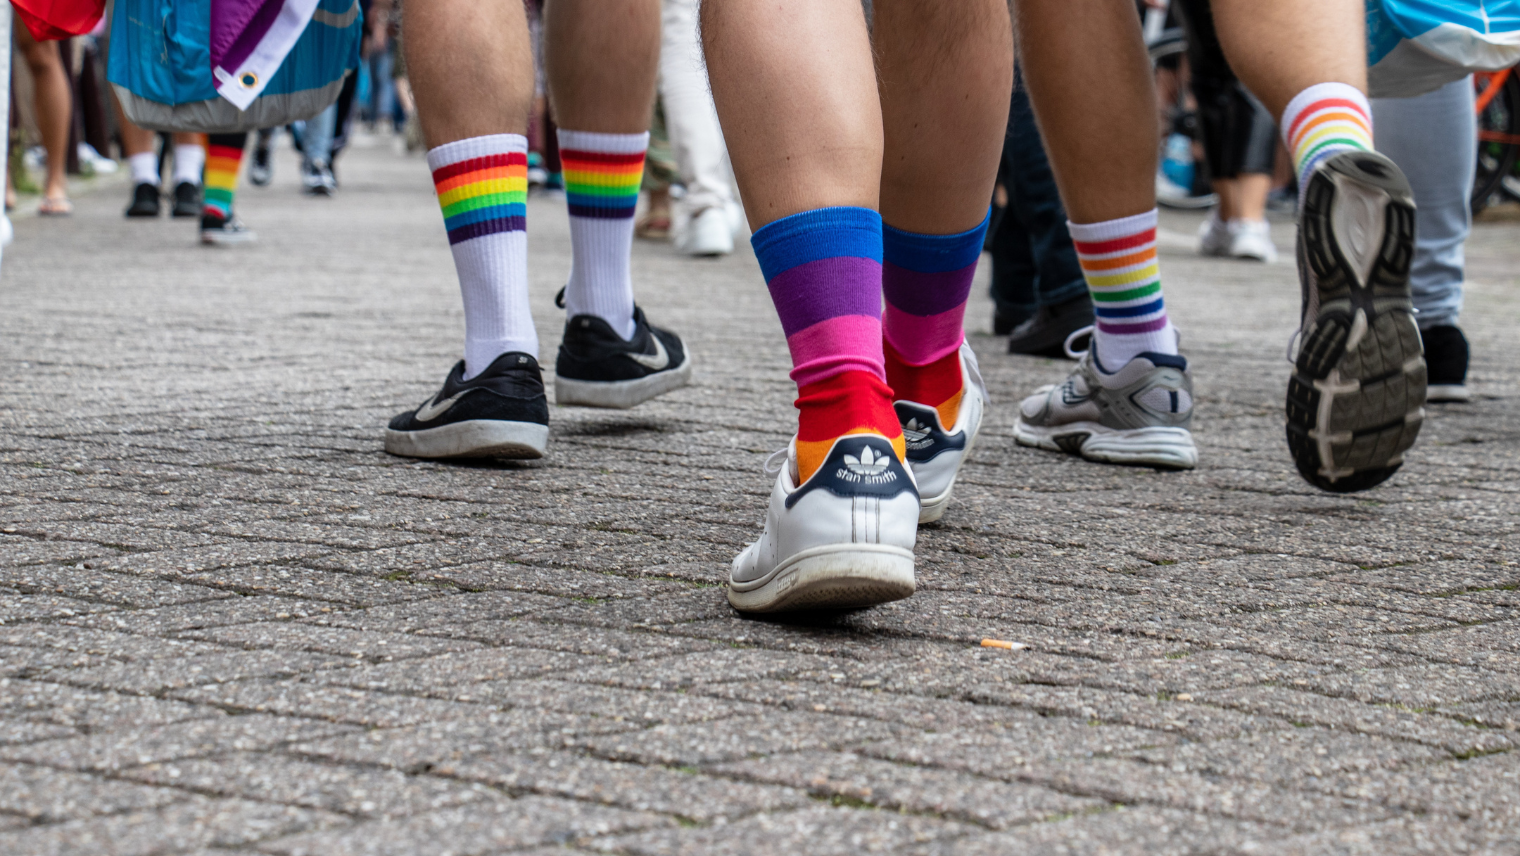 Image of 3 people's feet and calves. They're wearing colourful socks and walking on the street at a Pride event